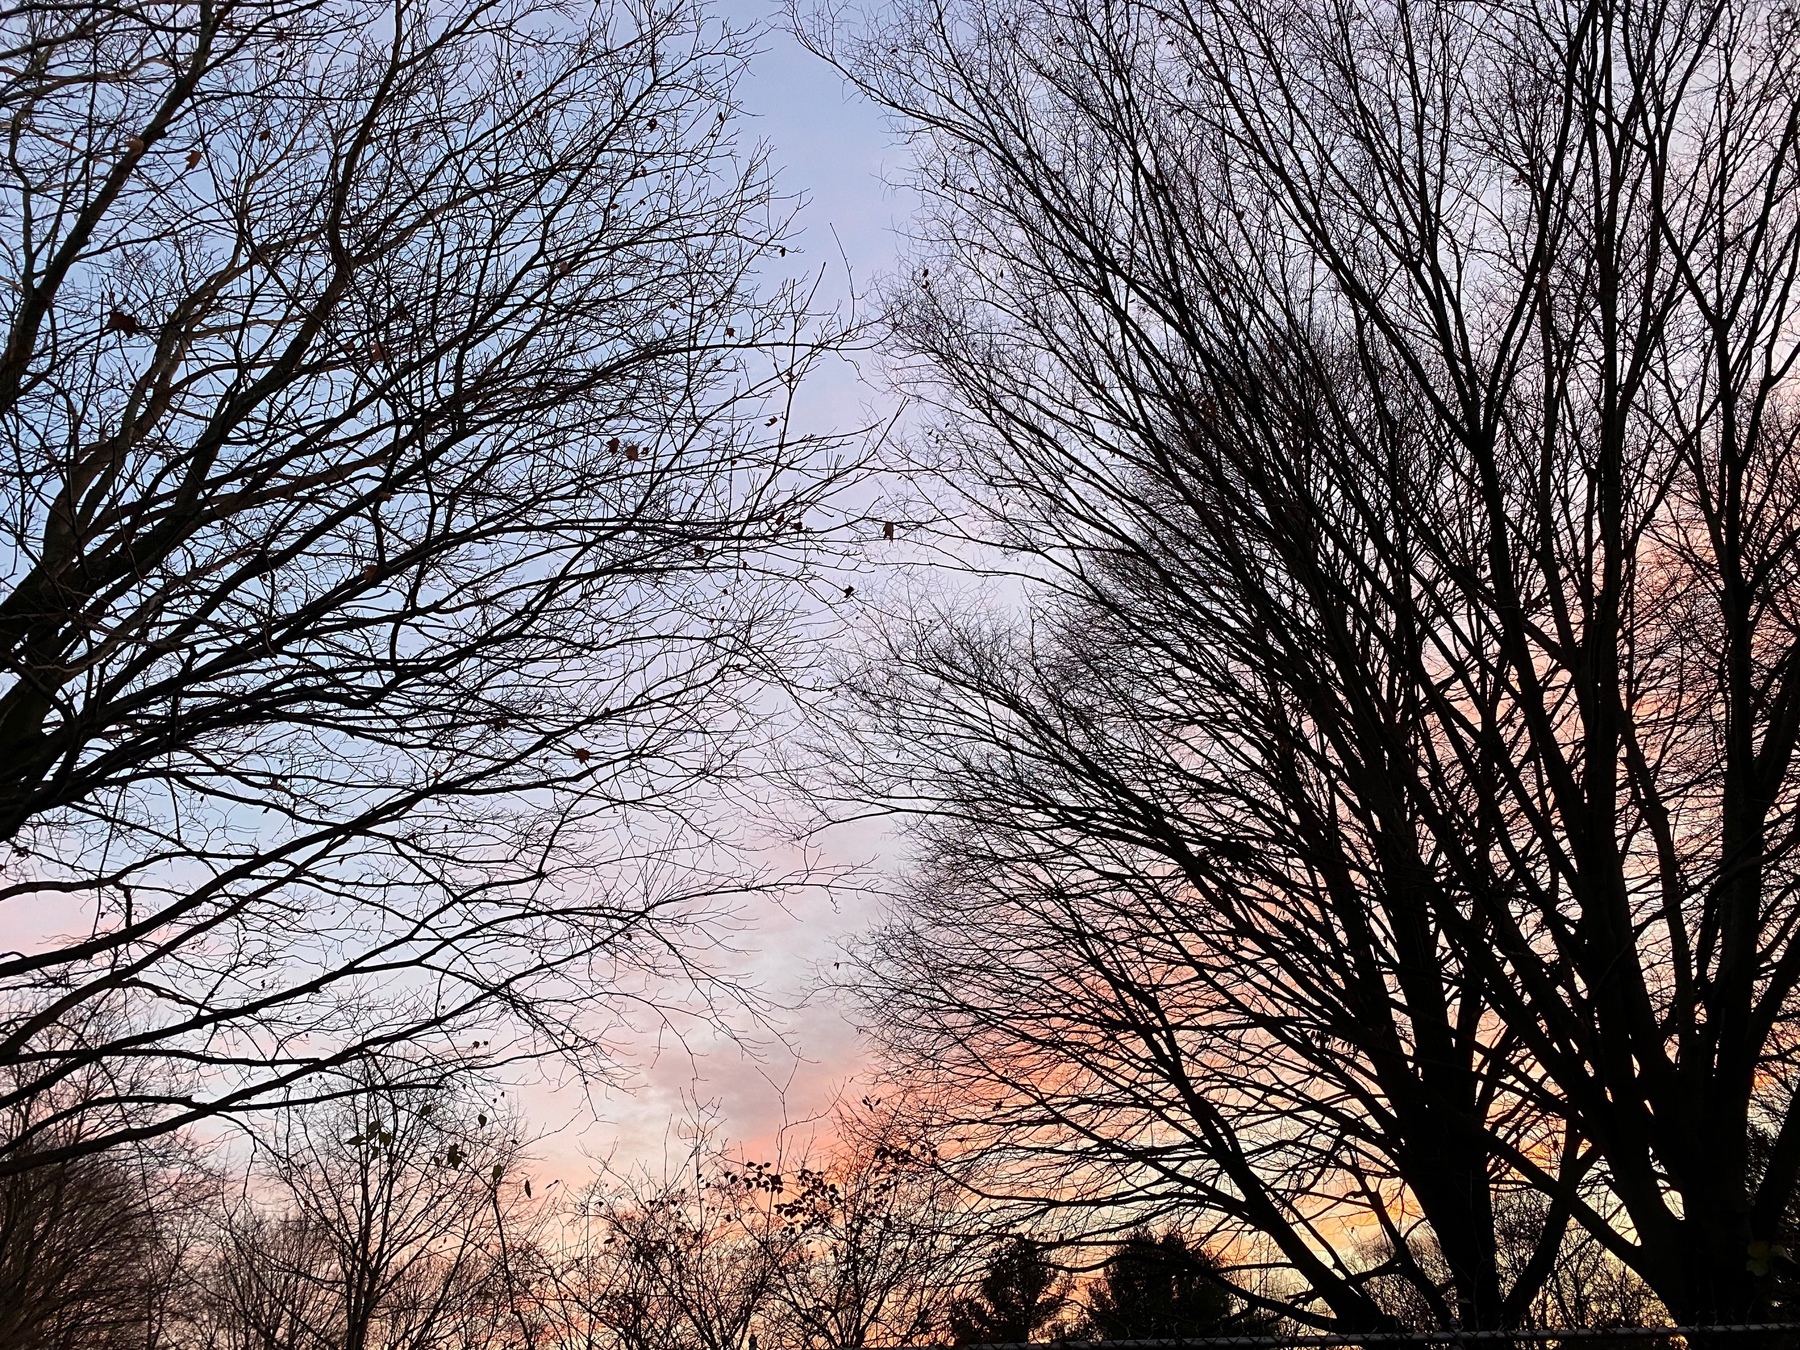 View of leafless trees silhouetted against a faint pink and blue sunset sky.